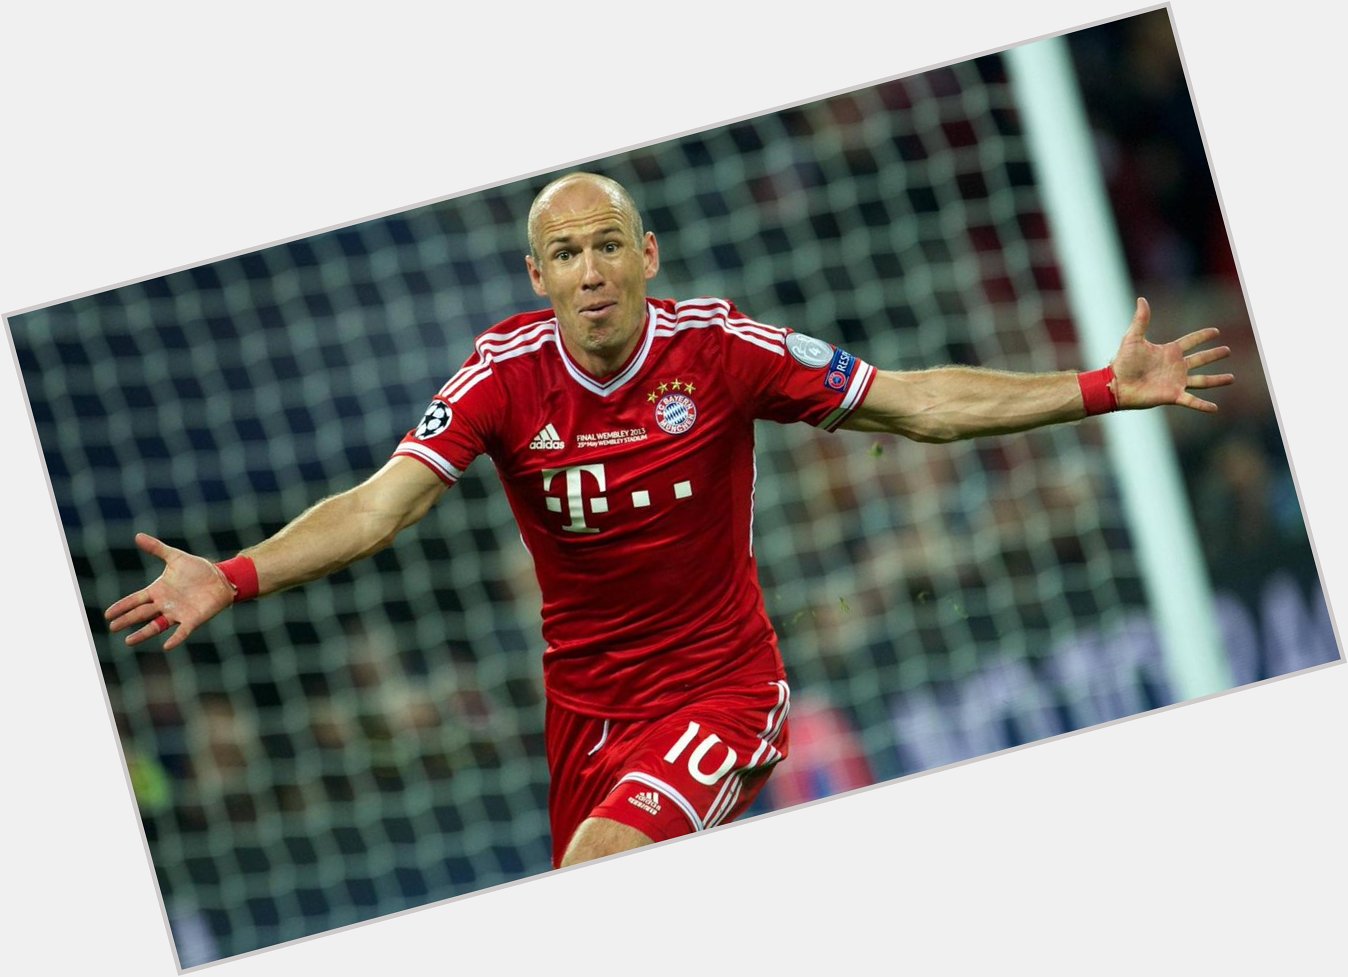 Everyone wishes a very, very happy to our Wembley 2013 hero, Arjen !  